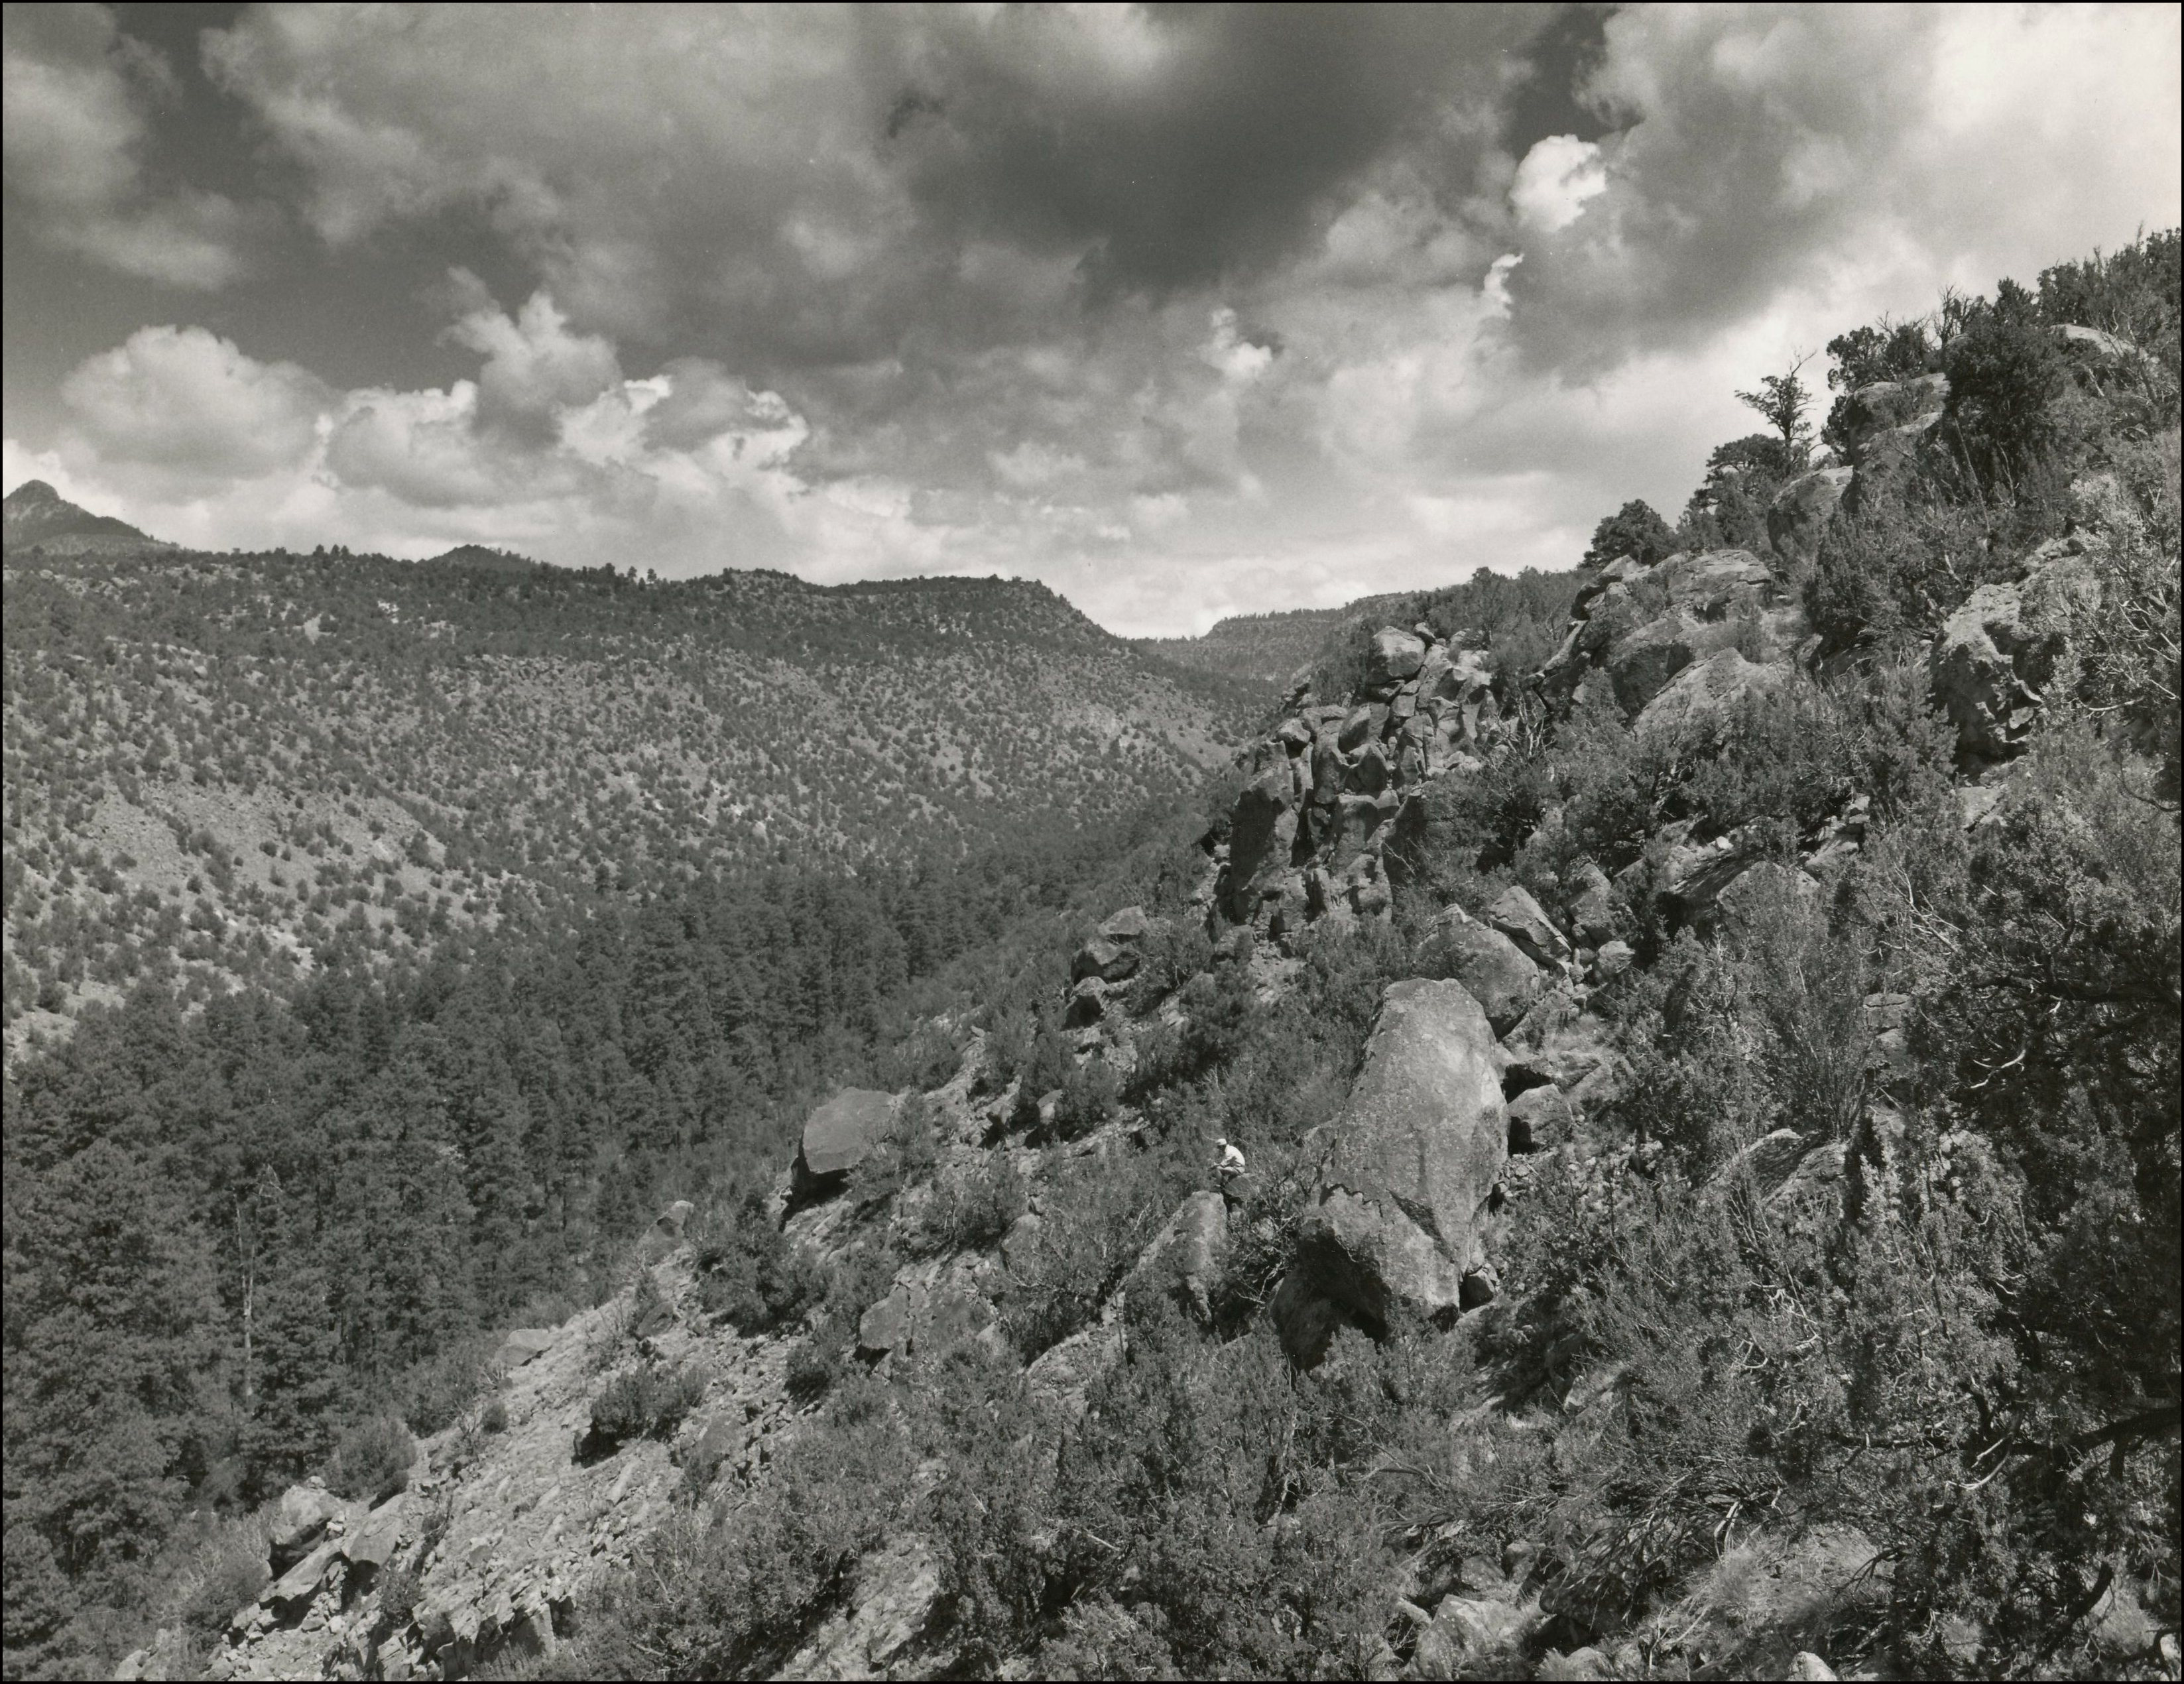 Mountains and canyon covered with rock and trees in a wilderness area